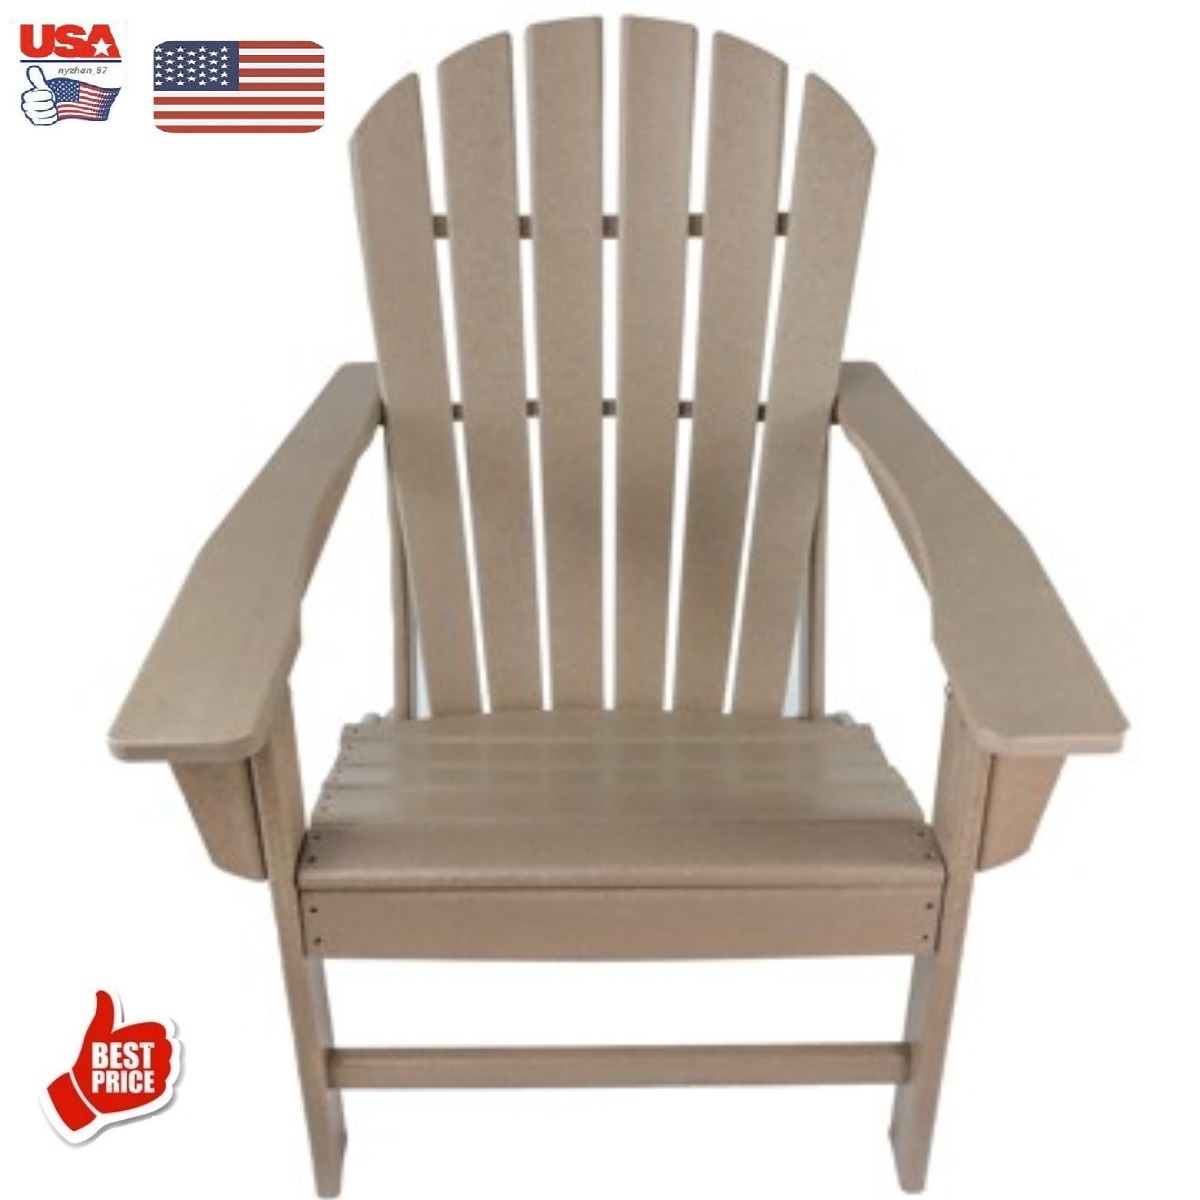 Adirondack Chair Resin, 350 lbs Capacity Load,Patio Chair Lawn Chair Outdoor Adirondack Chairs Weather Resistant for Patio Deck Garden 33.07*31.1*36.4" HDPE Resin Wood,Brown - image 2 of 8